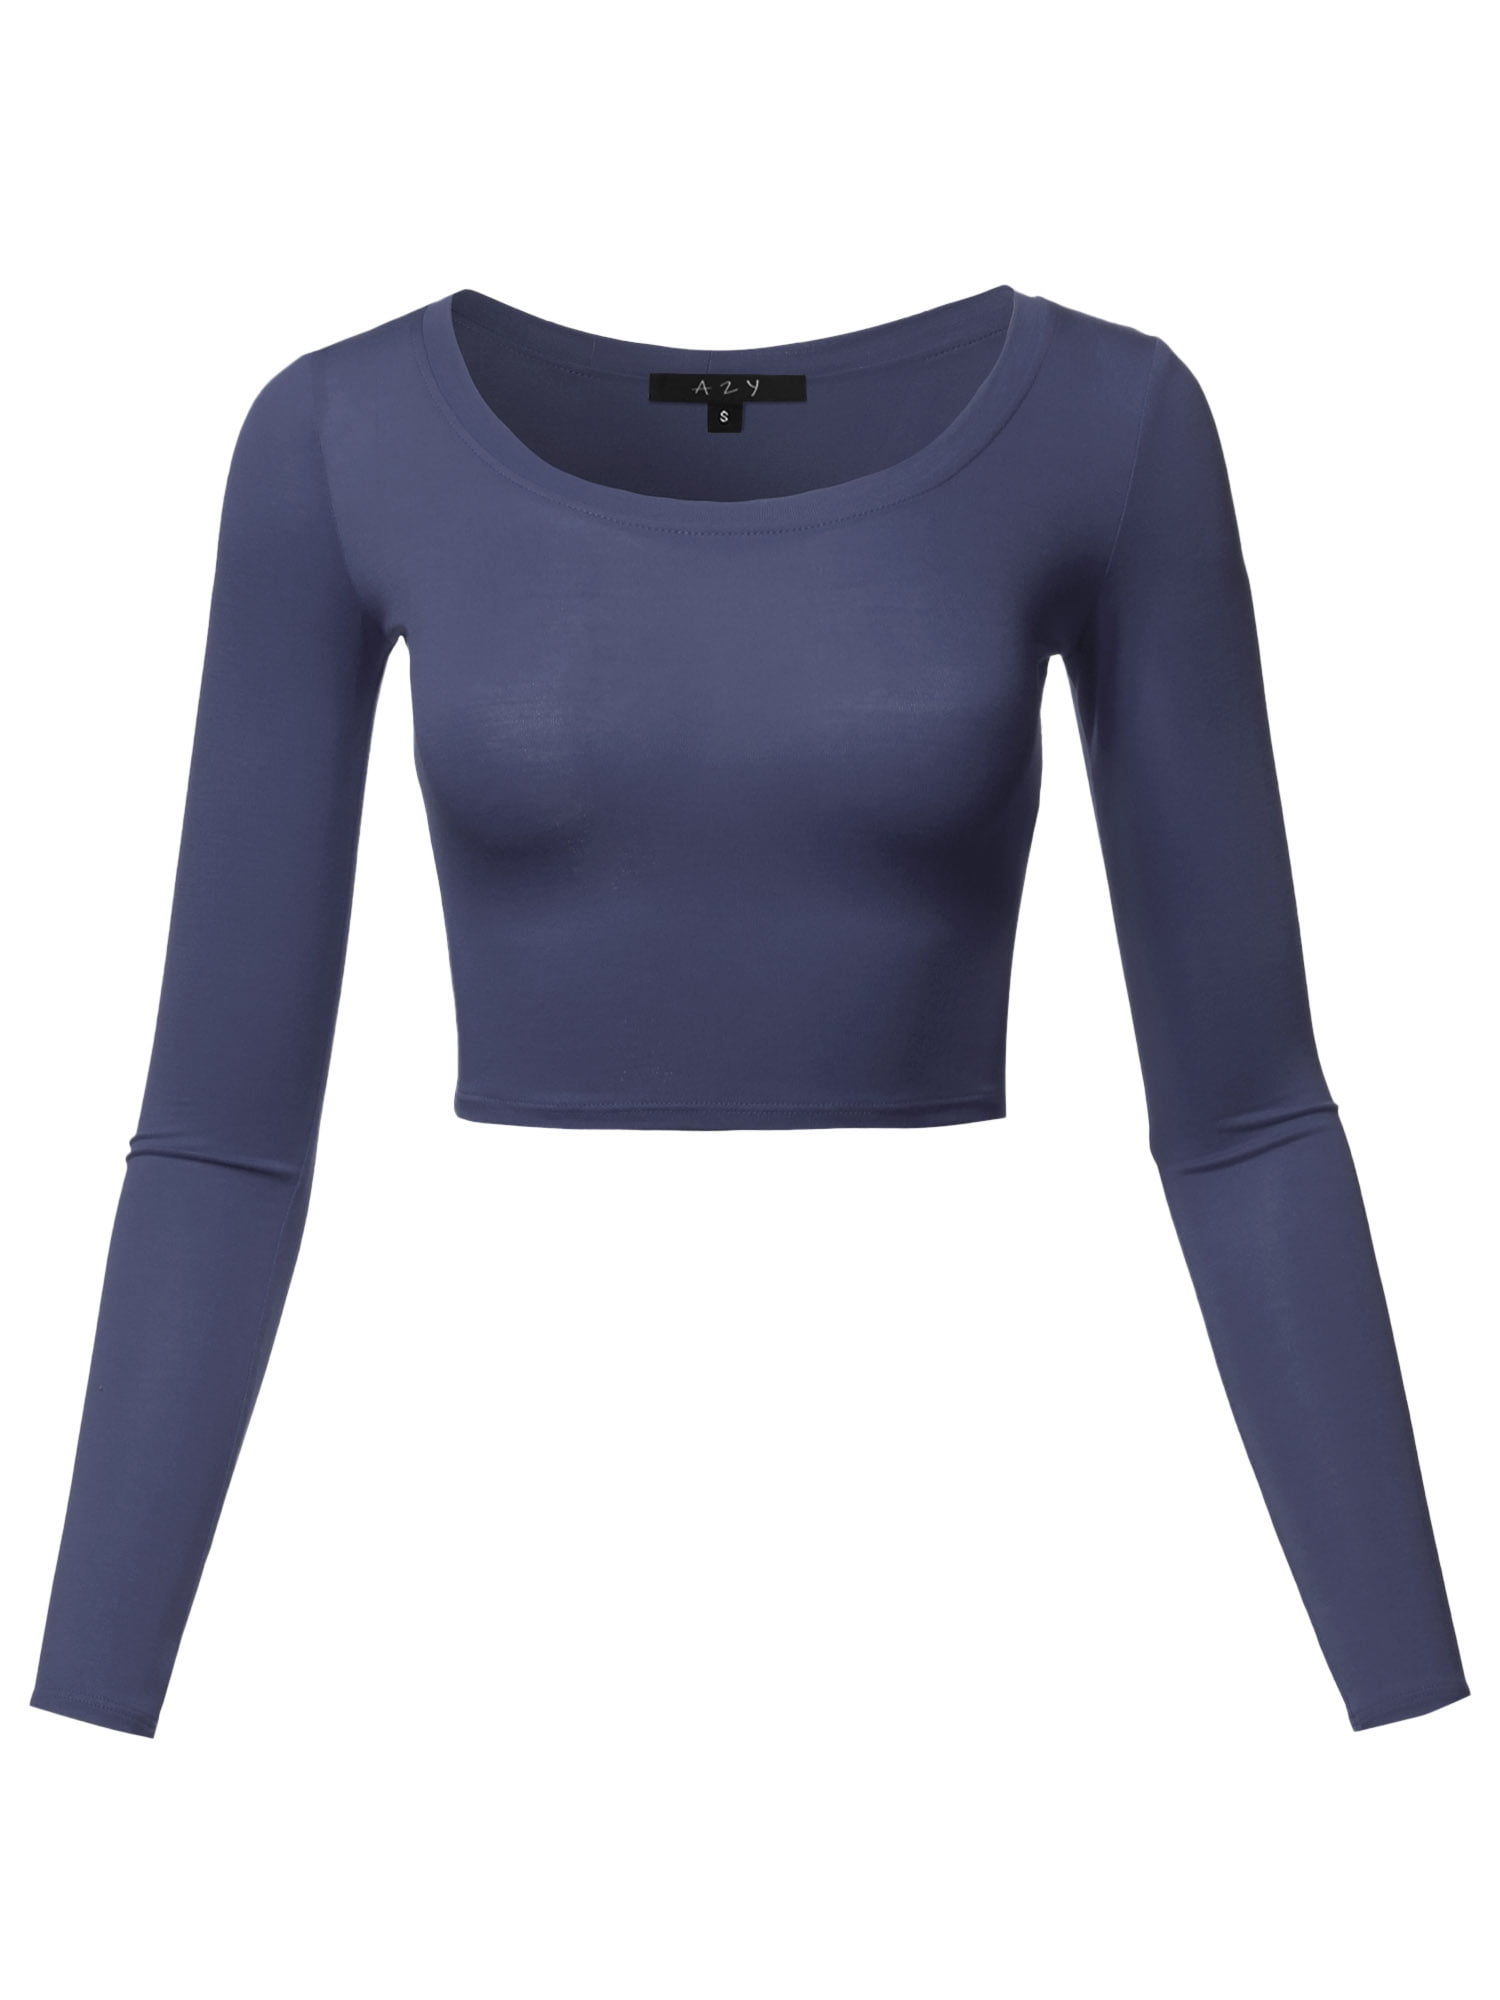 A2Y Women's Basic Solid Stretchable Scoop Neck Long Sleeve Crop